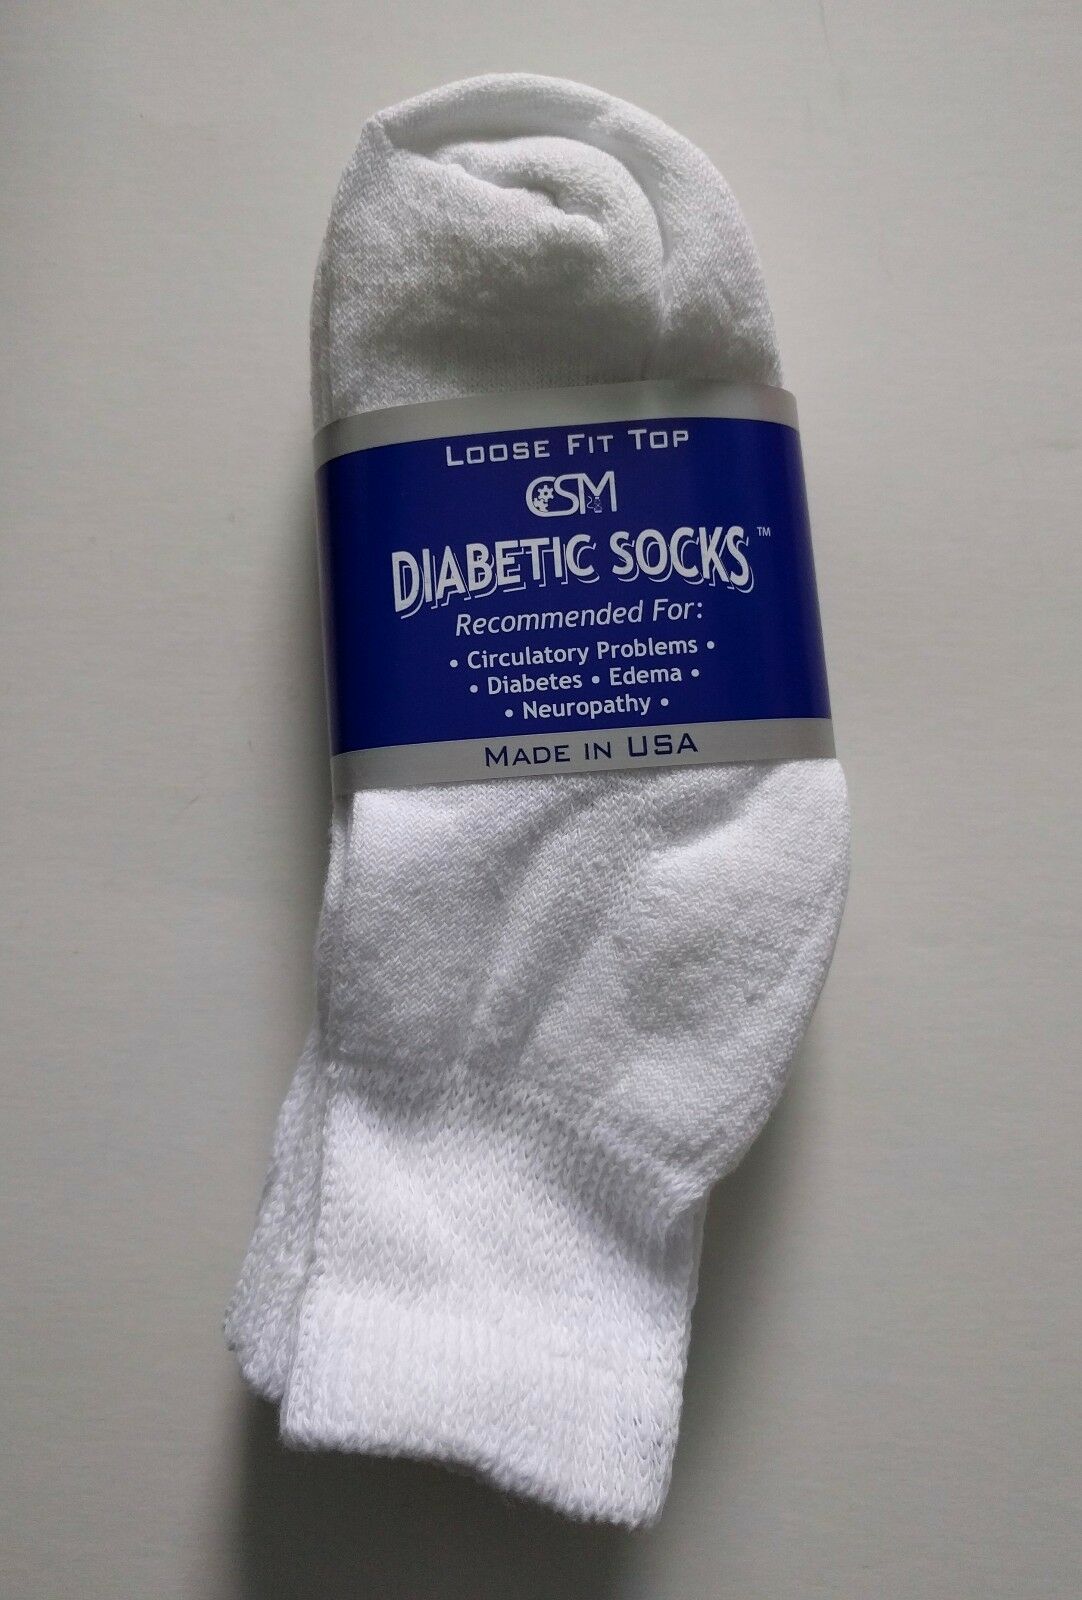 Womens Diabetic Casual White Golf Socks Sz9-11 Loose Fit Top 3 Pairs Made In Usa